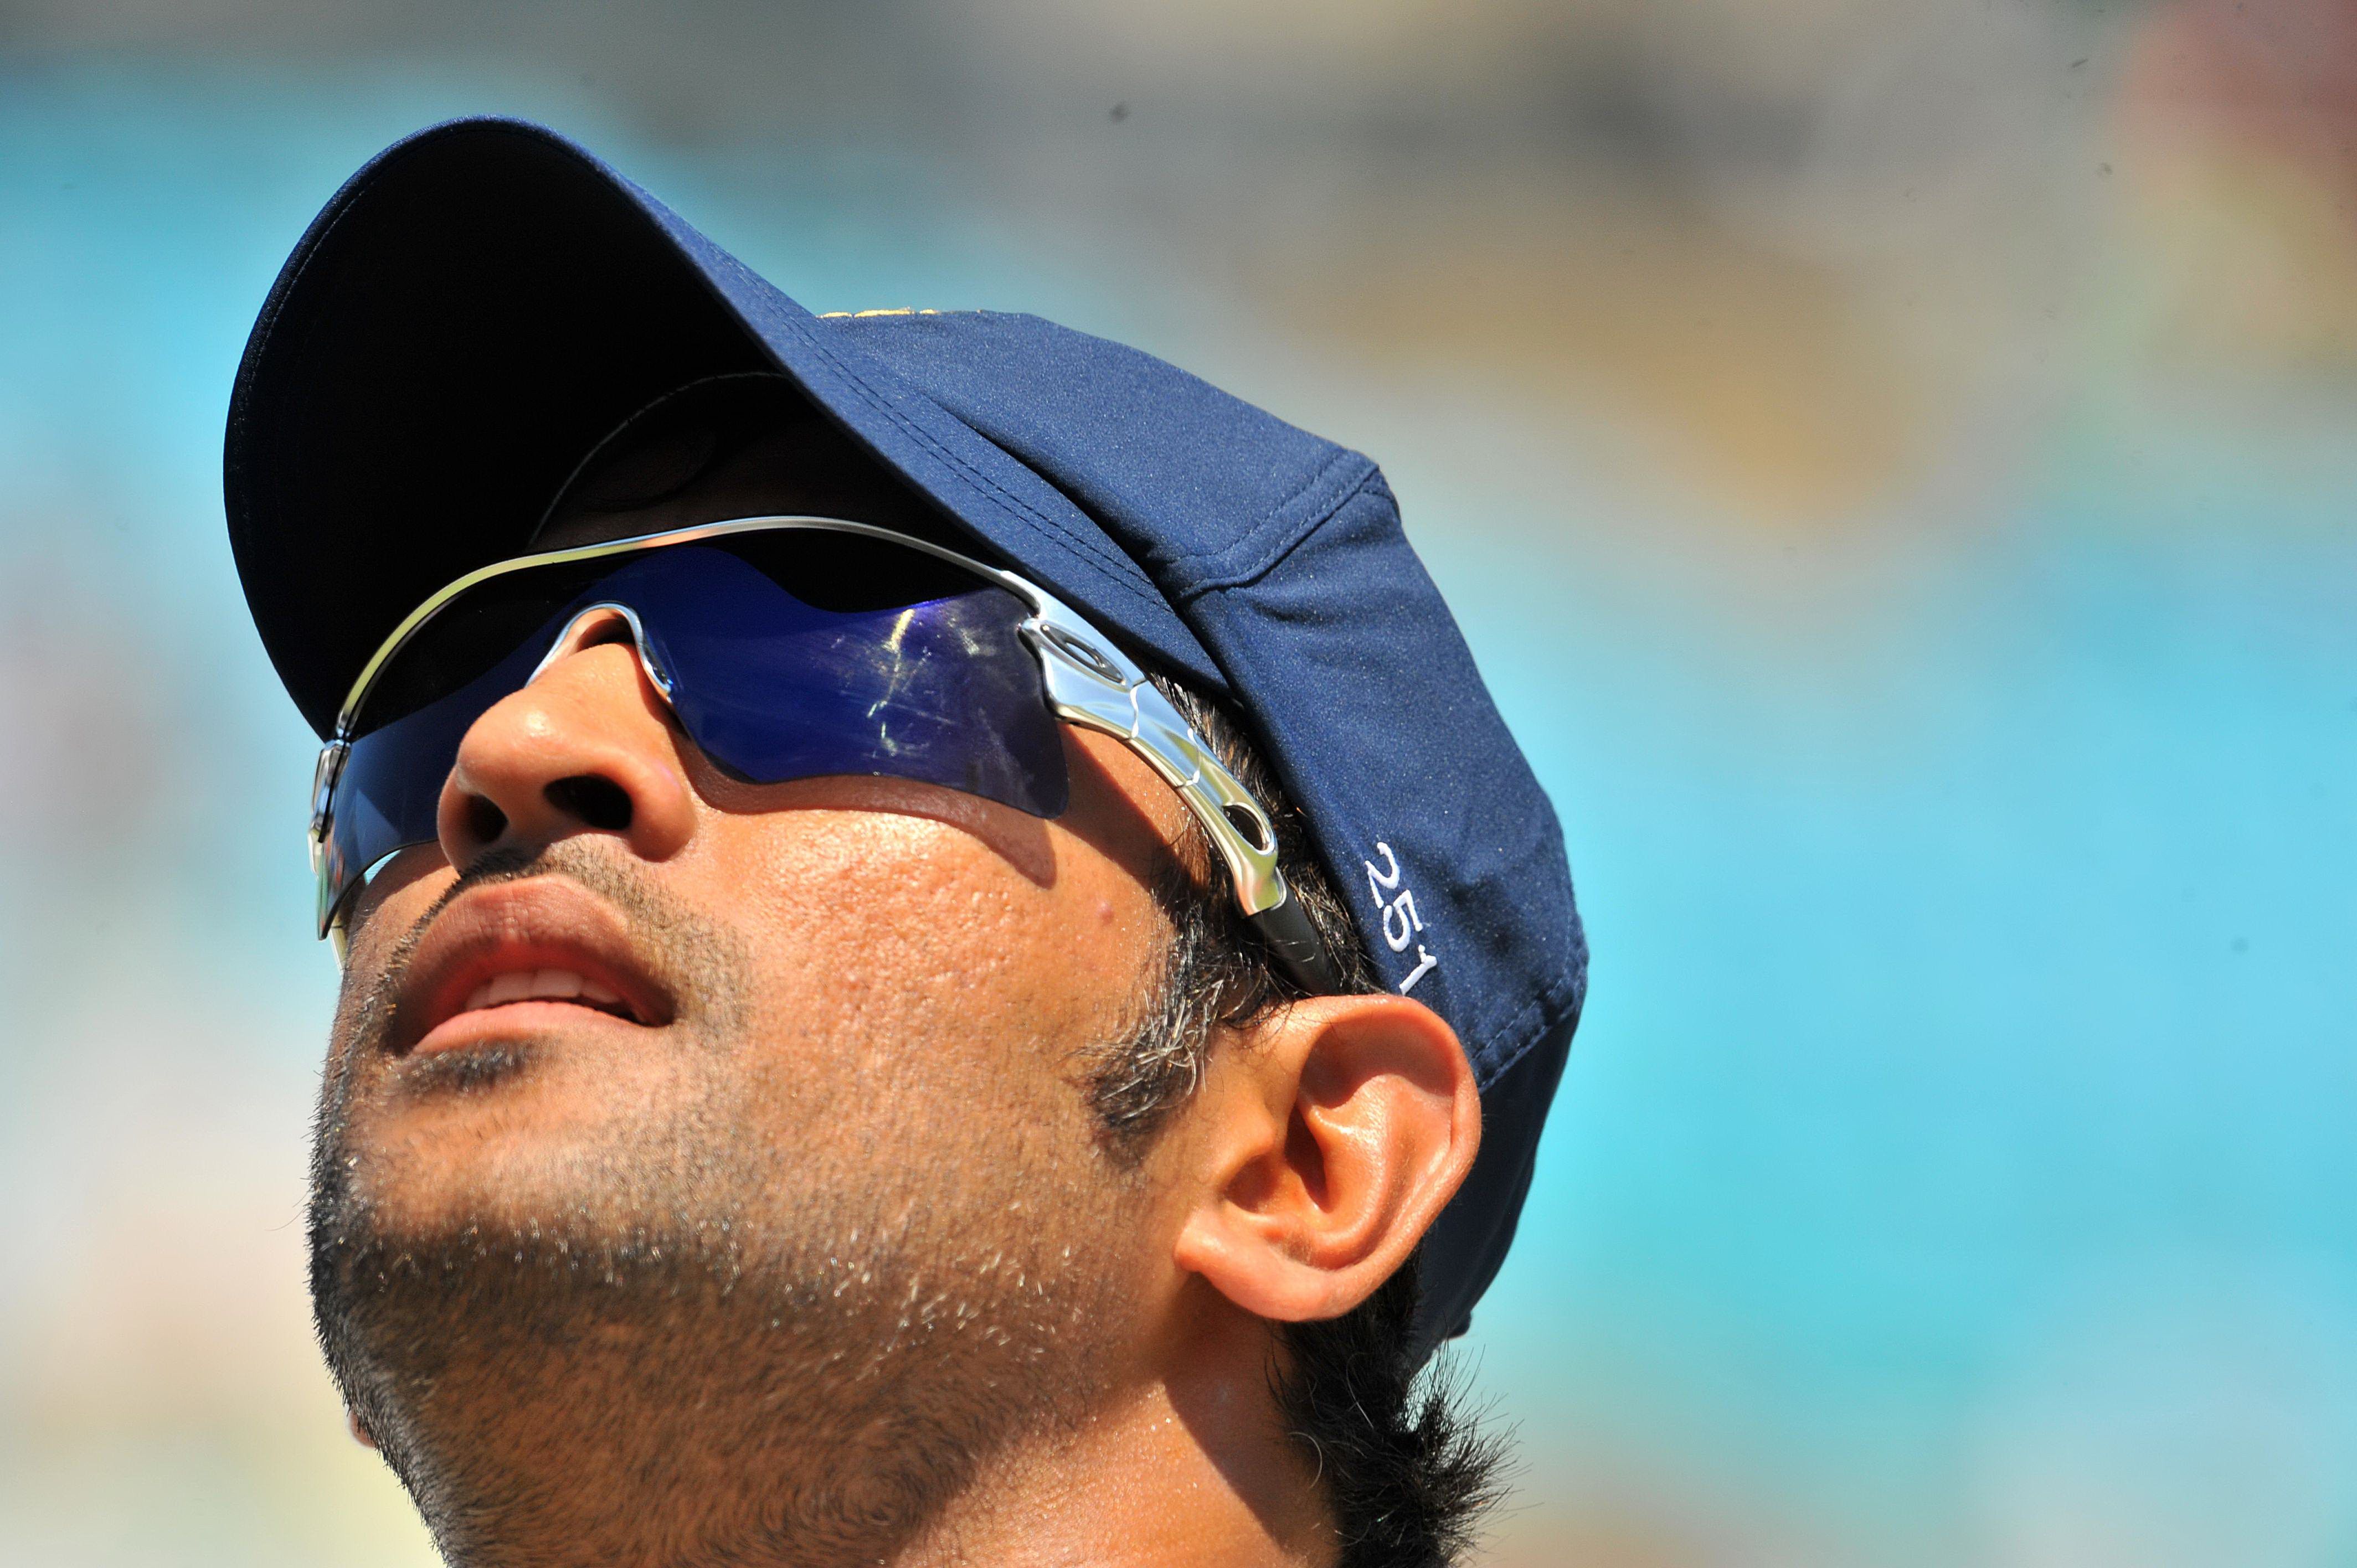 Download photos of mahendra singh dhoni in sports goggles 8322